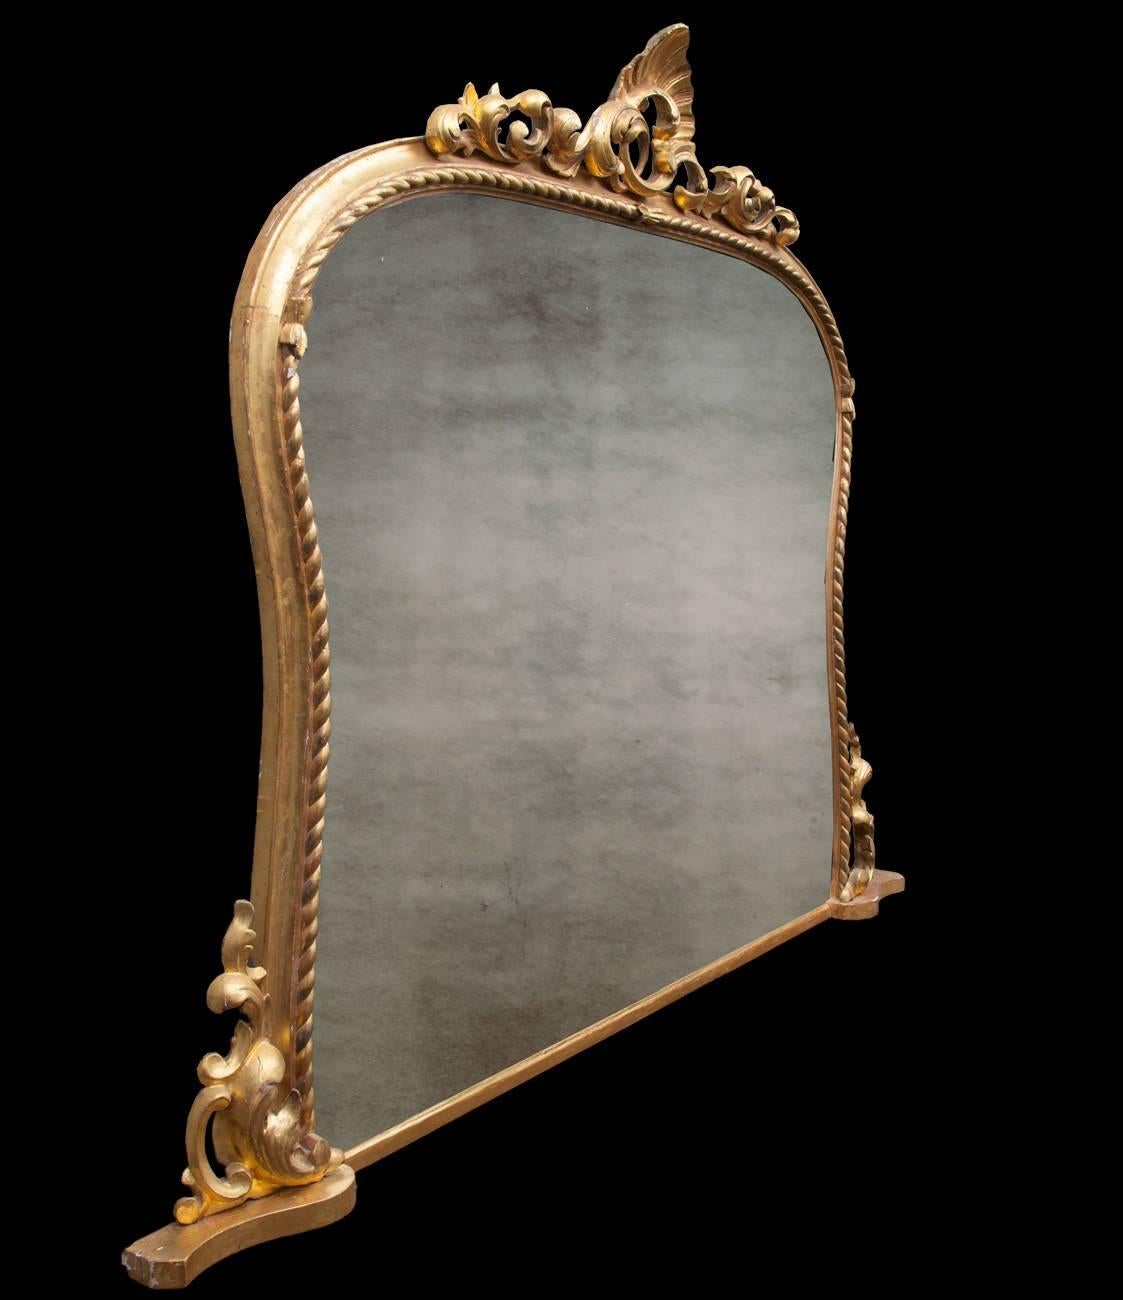 Large antique Irish carved giltwood overmantel mirror. The rope twist decorated shaped frame, surmounted by an ornate foliate pediment with flanking carvings to the base. The original gilding is a great color and the overall condition of the mirror